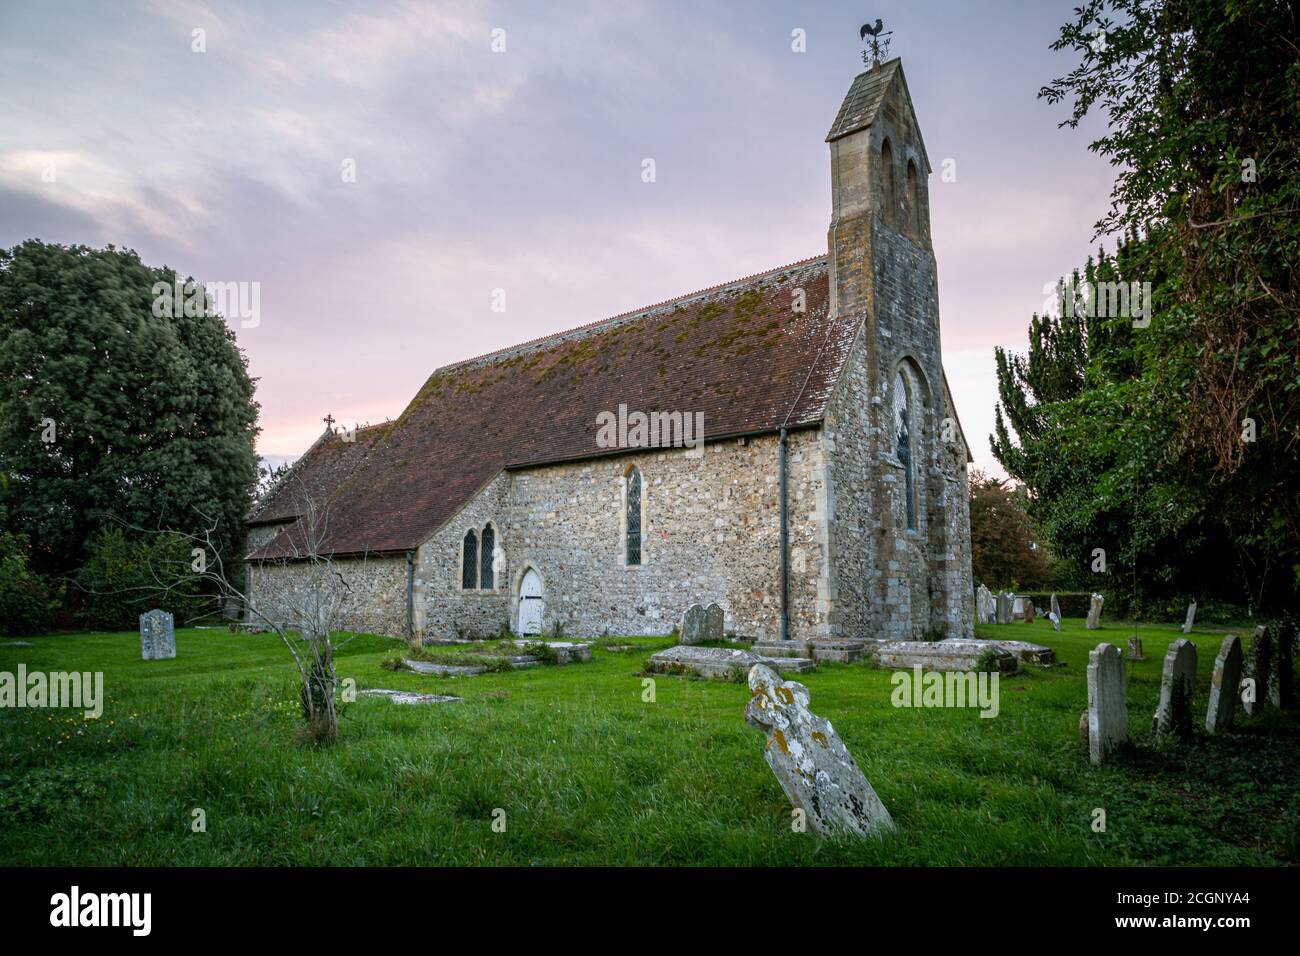 The exterior Of St Mary's church in Chidham West Sussex, UK A typical English church Stock Photo